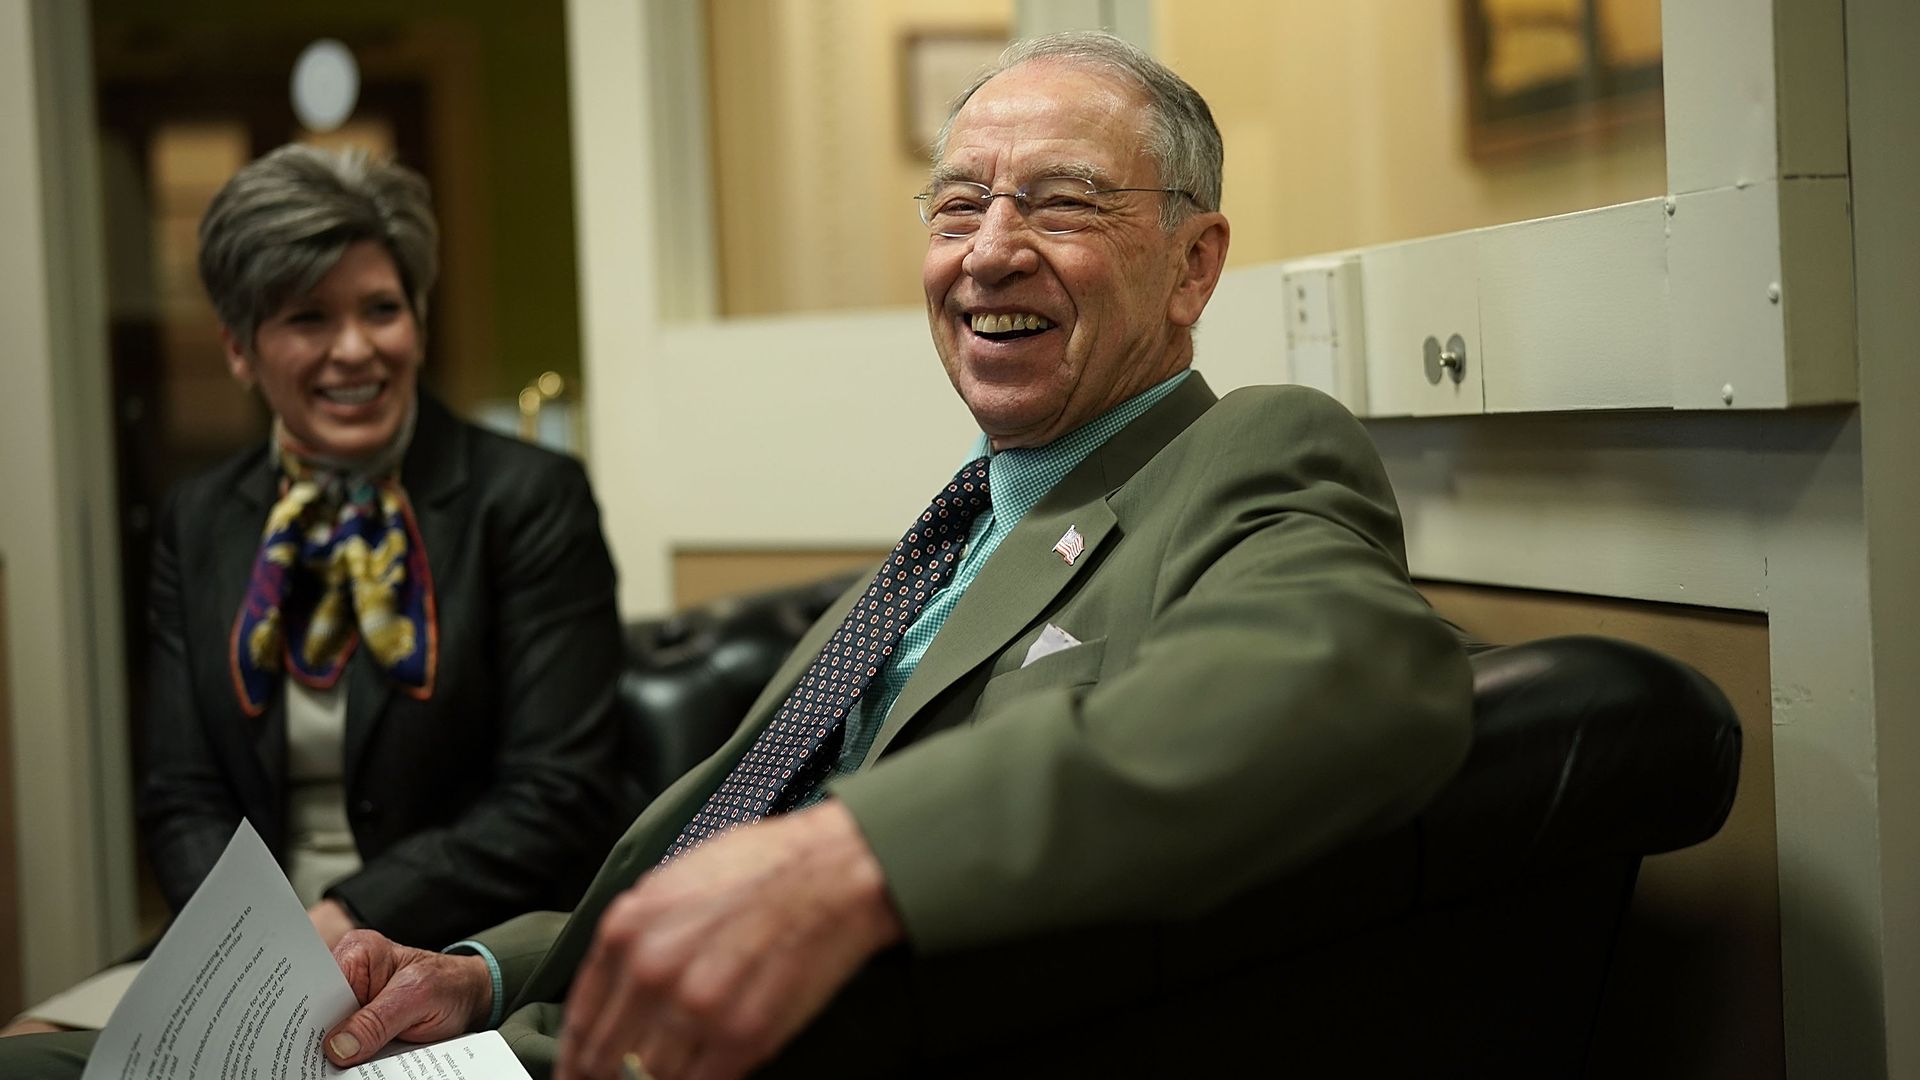 Chuck Grassley sitting with papers and laughing